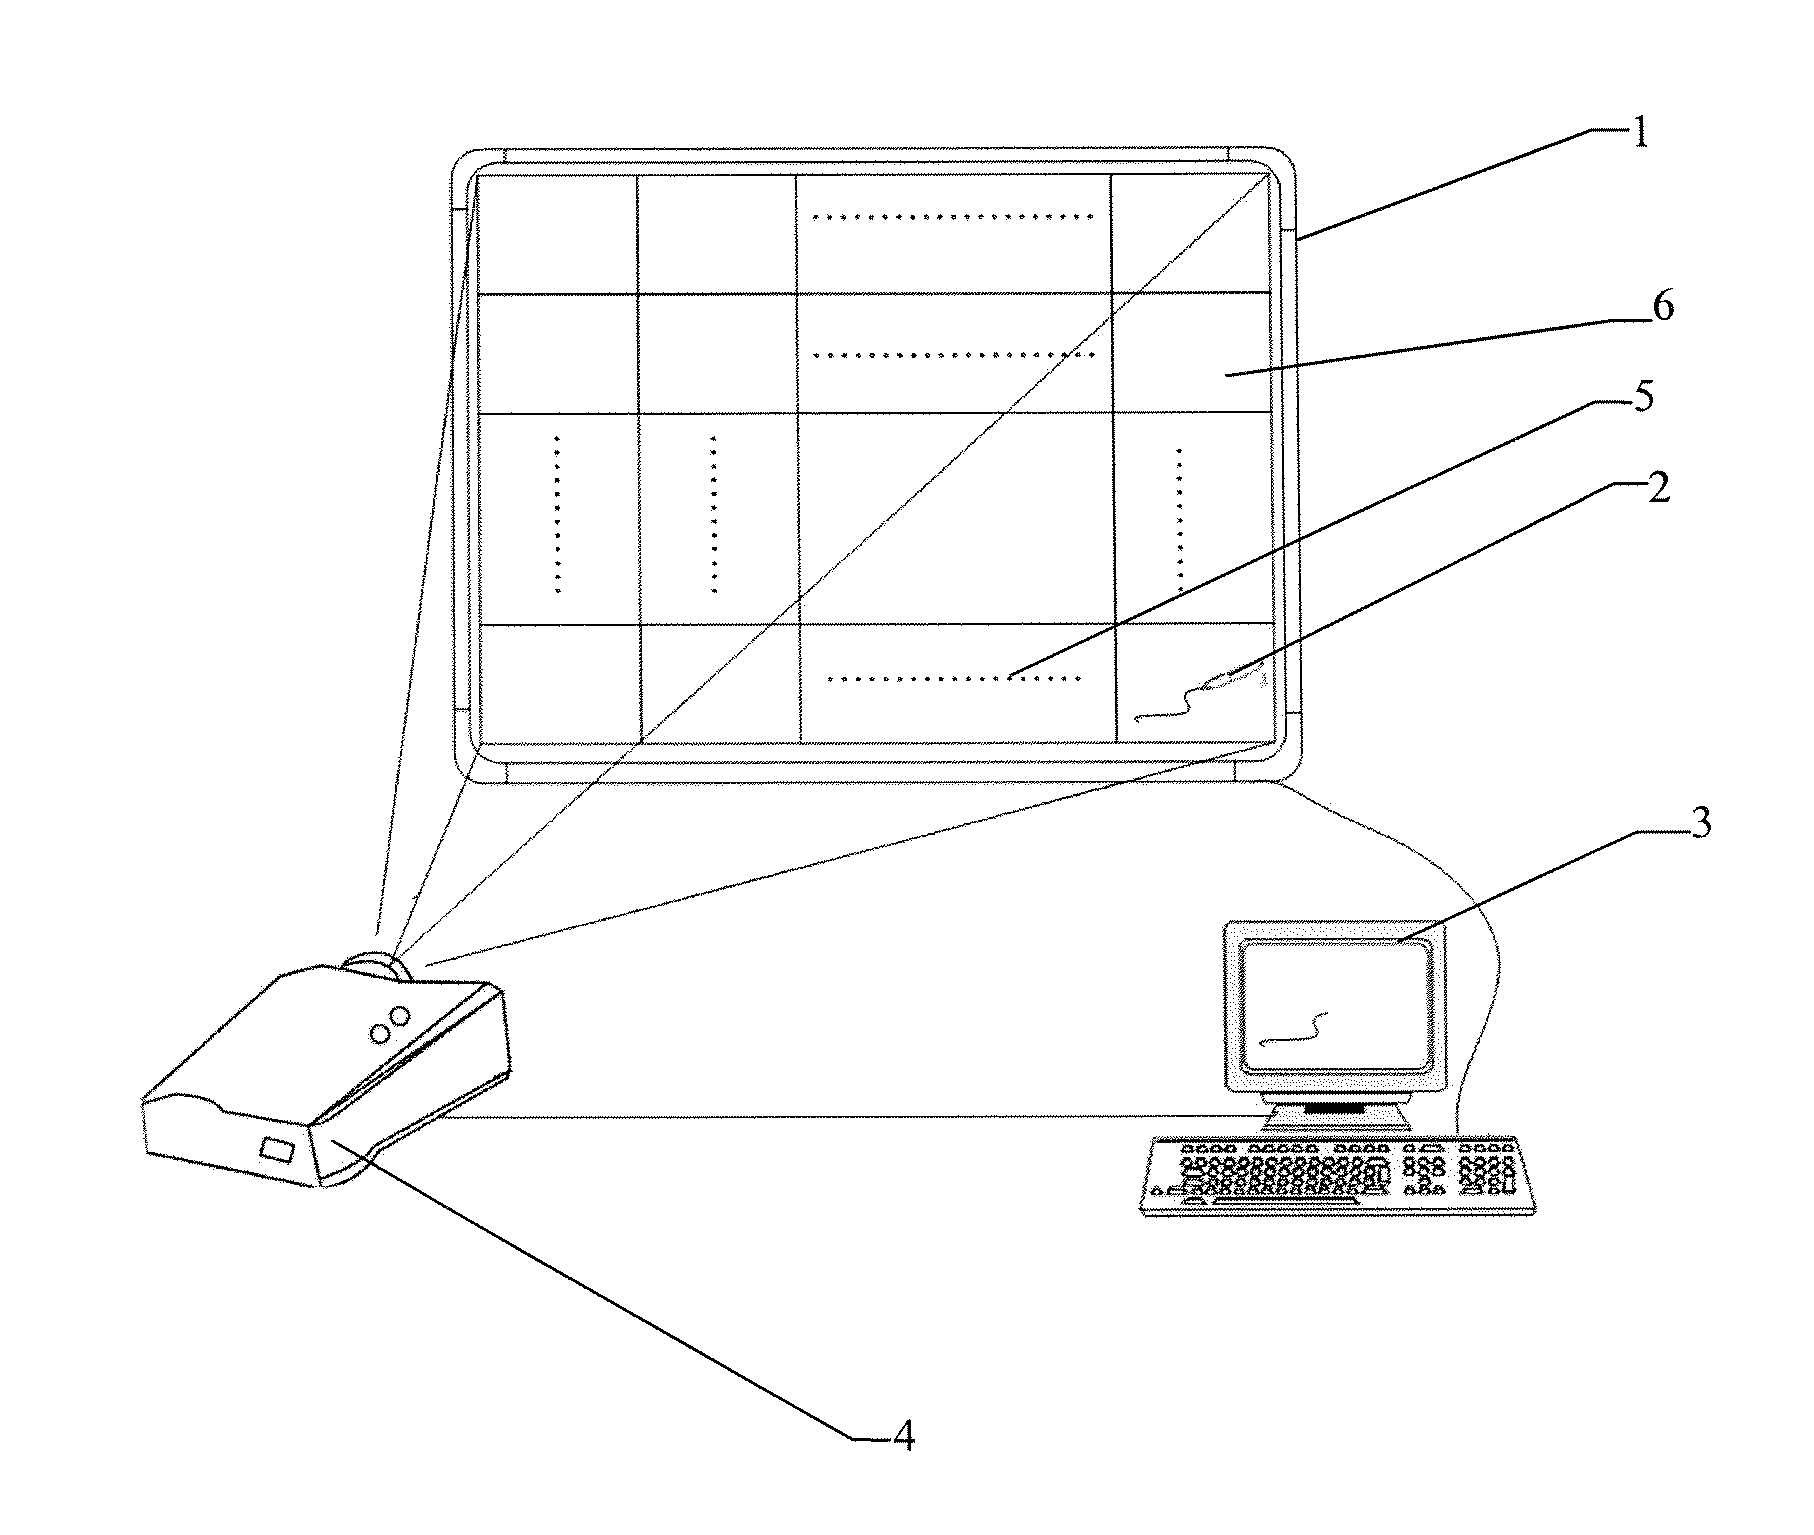 Large Screen information interactive system and method of use